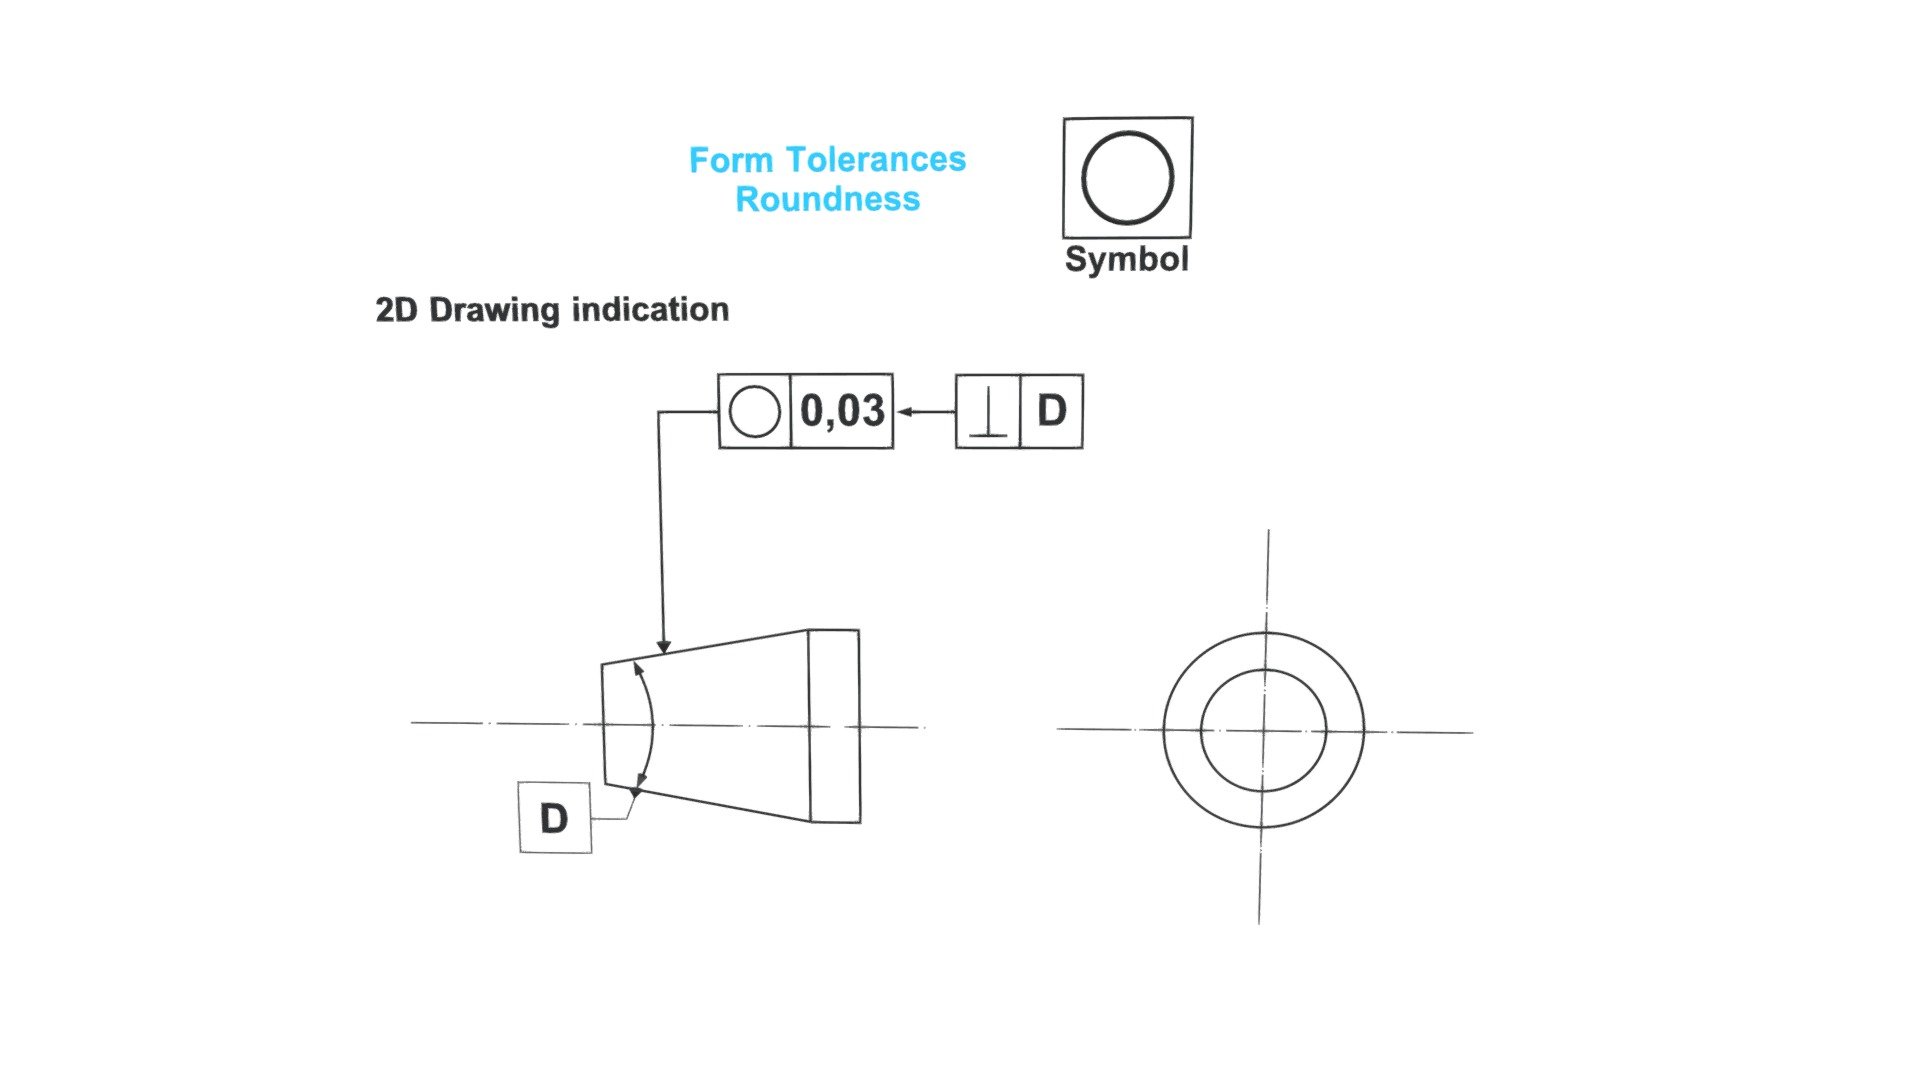 Form Tolerances Roundness on 2D drawing